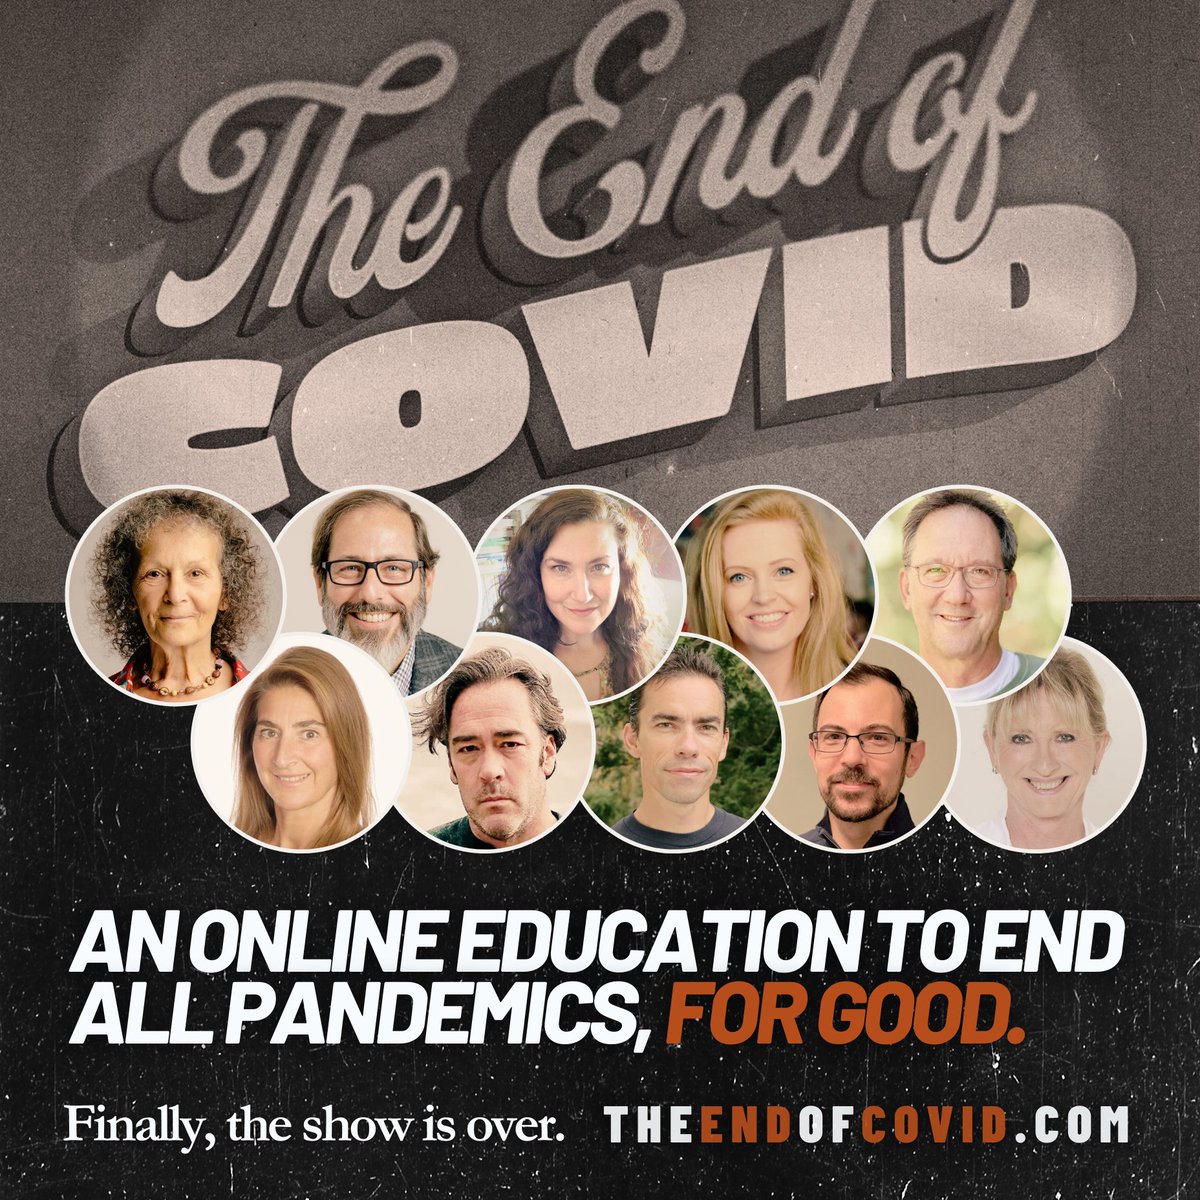 The Spanish flu, The polio epidemic
The AIDS crisis, The SARS outbreak
The bird flu panic, The coronavirus
It’s the same old show, with the same old script. And on July 11th, it’s ending for good, with 100+ hours of educational content. theendofcovid.com/ref/497/ #theshowisover